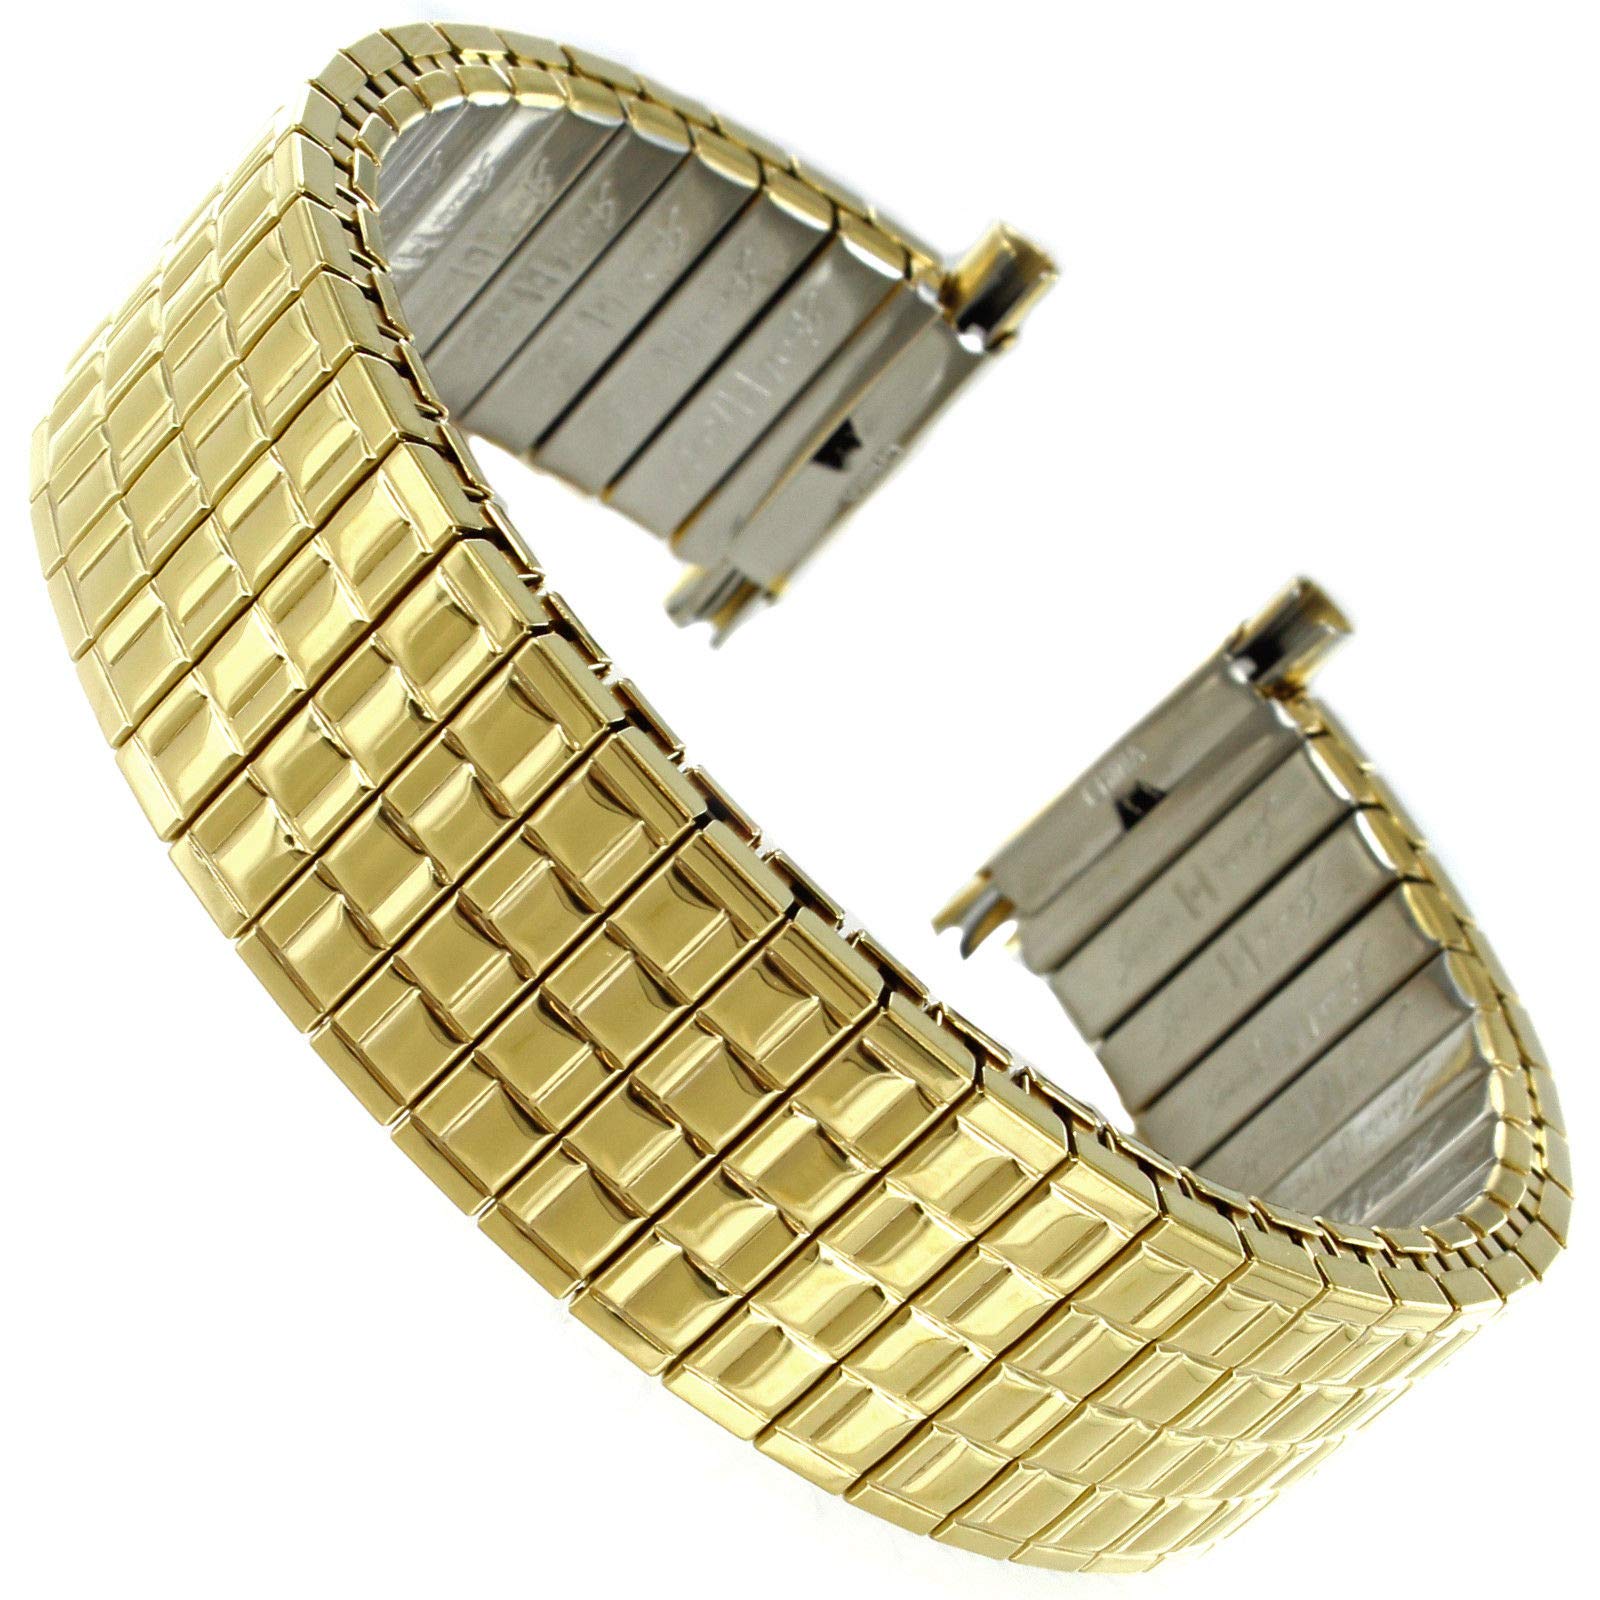 15-21mm Hirsch Speidel Gold Stainless Steel Mens Expansion Watch Band 759-1610